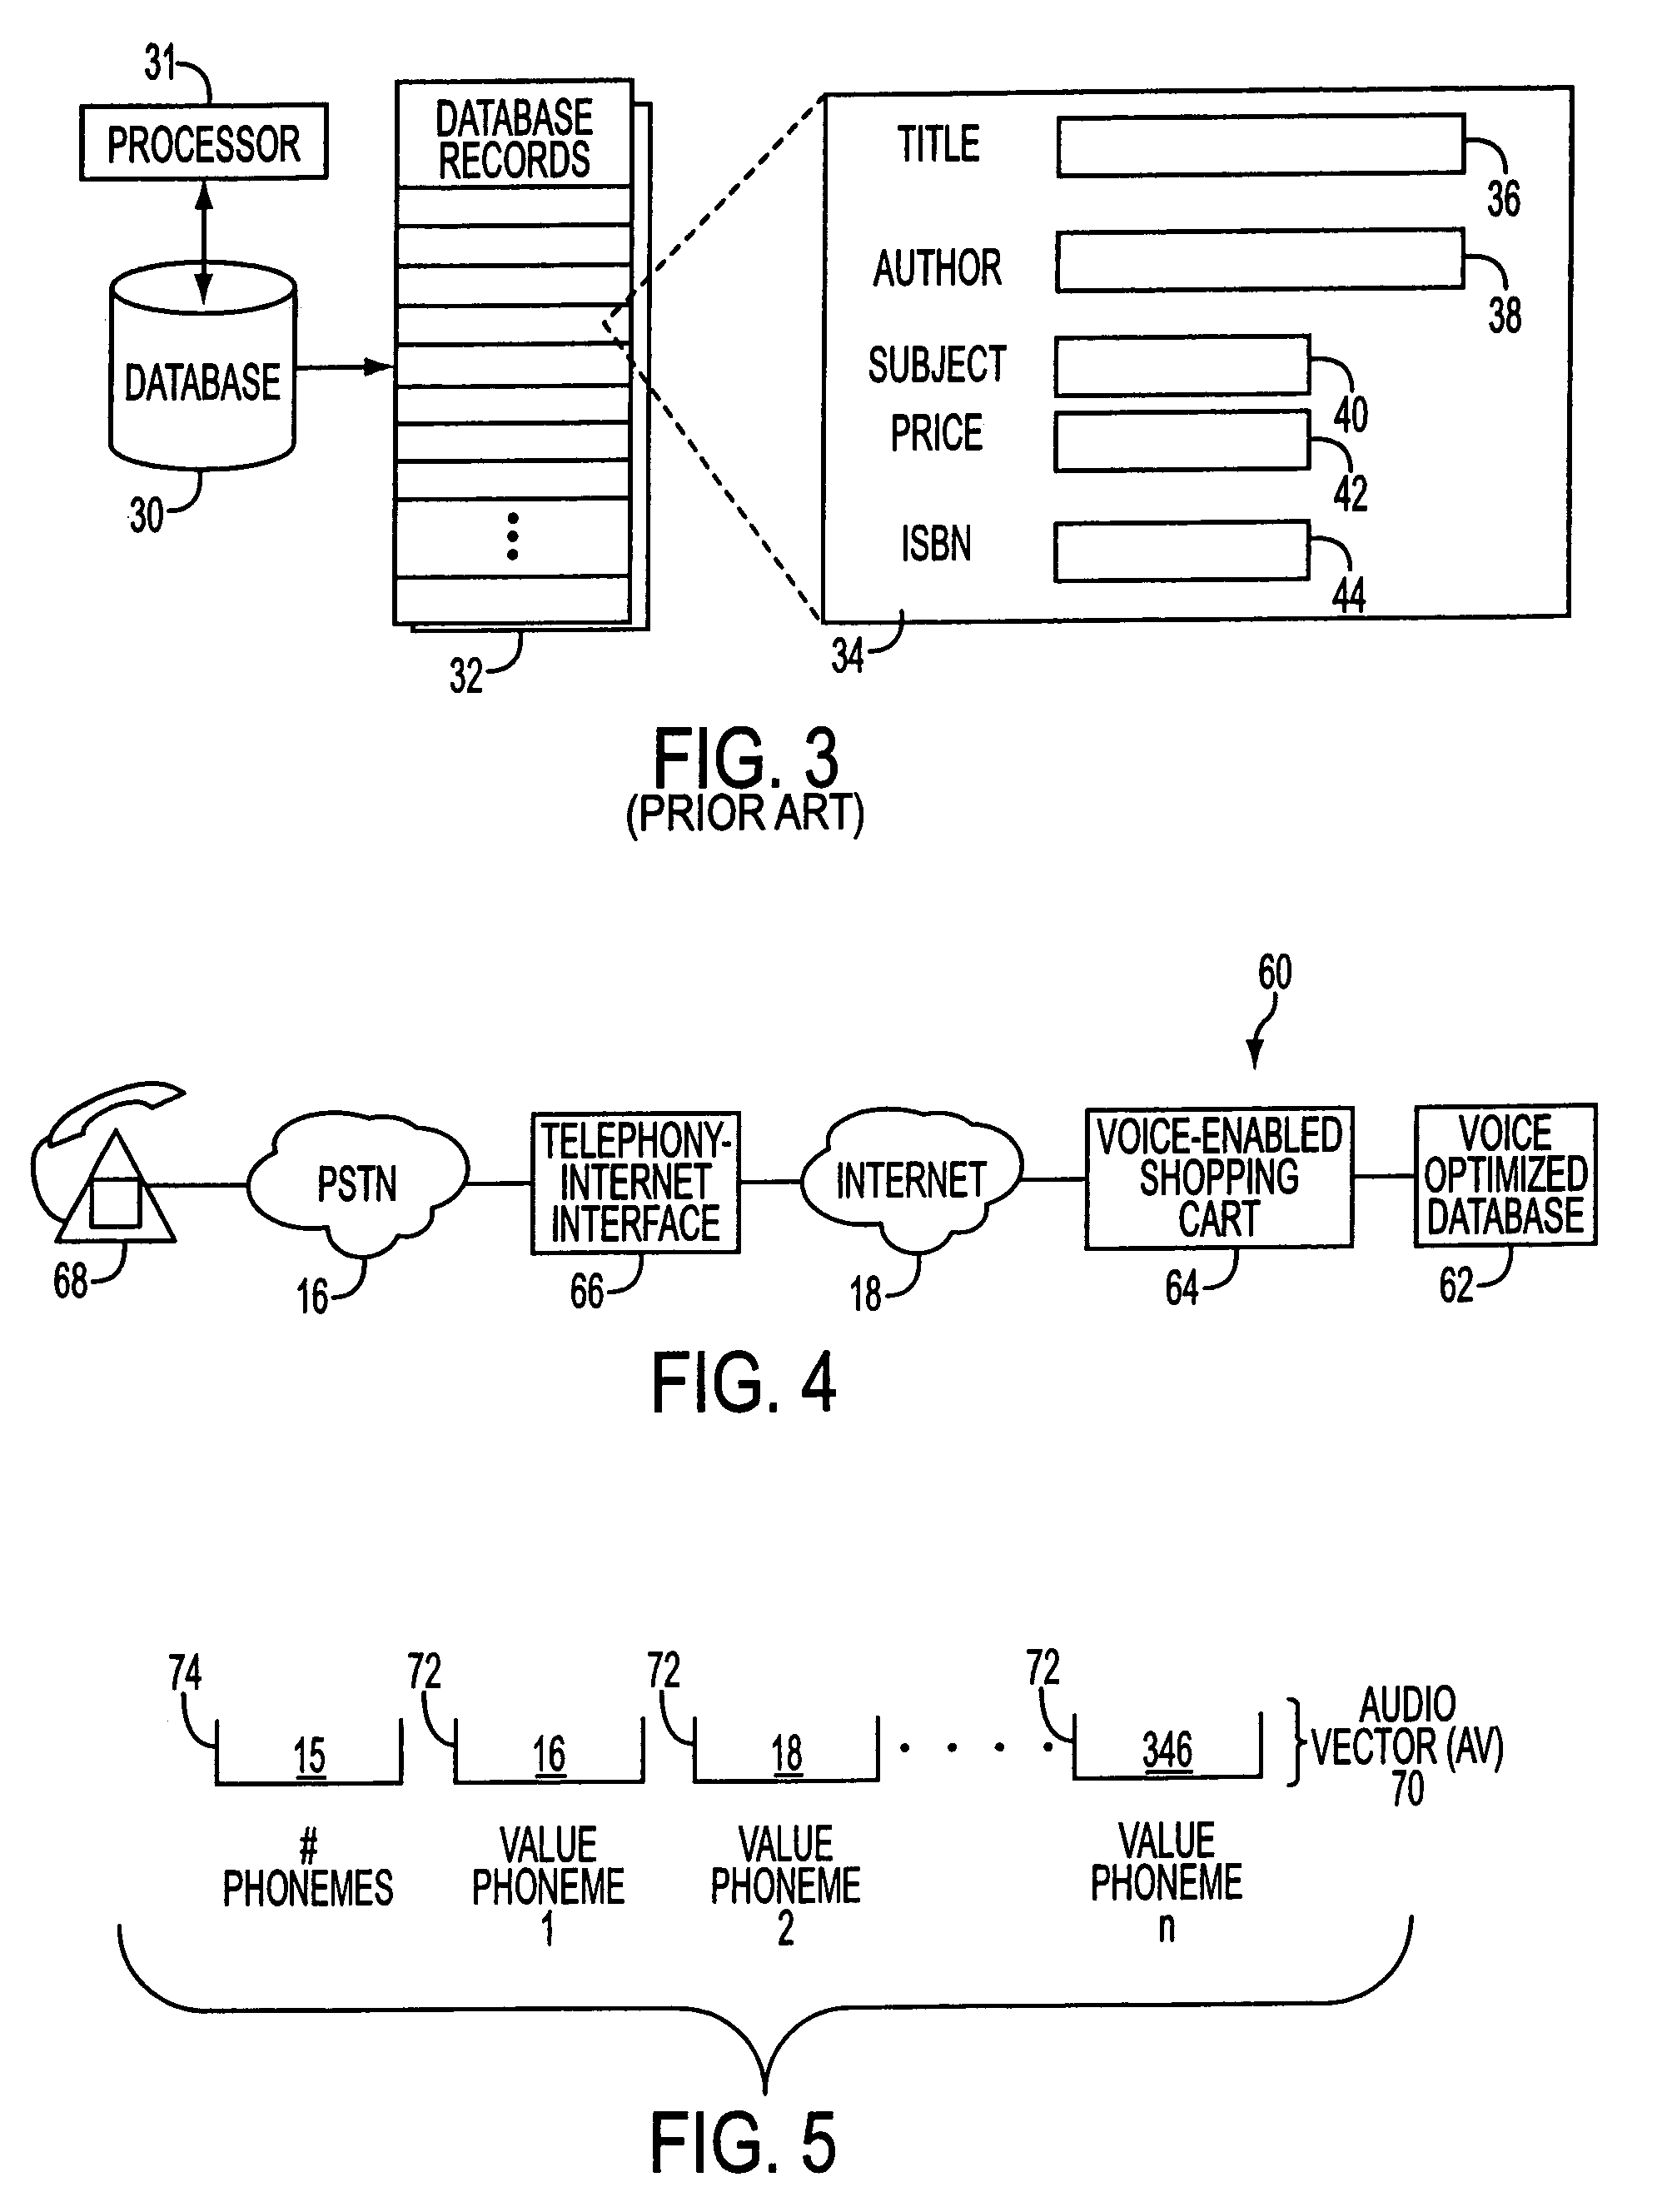 Telephony-data application interface apparatus and method for multi-modal access to data applications